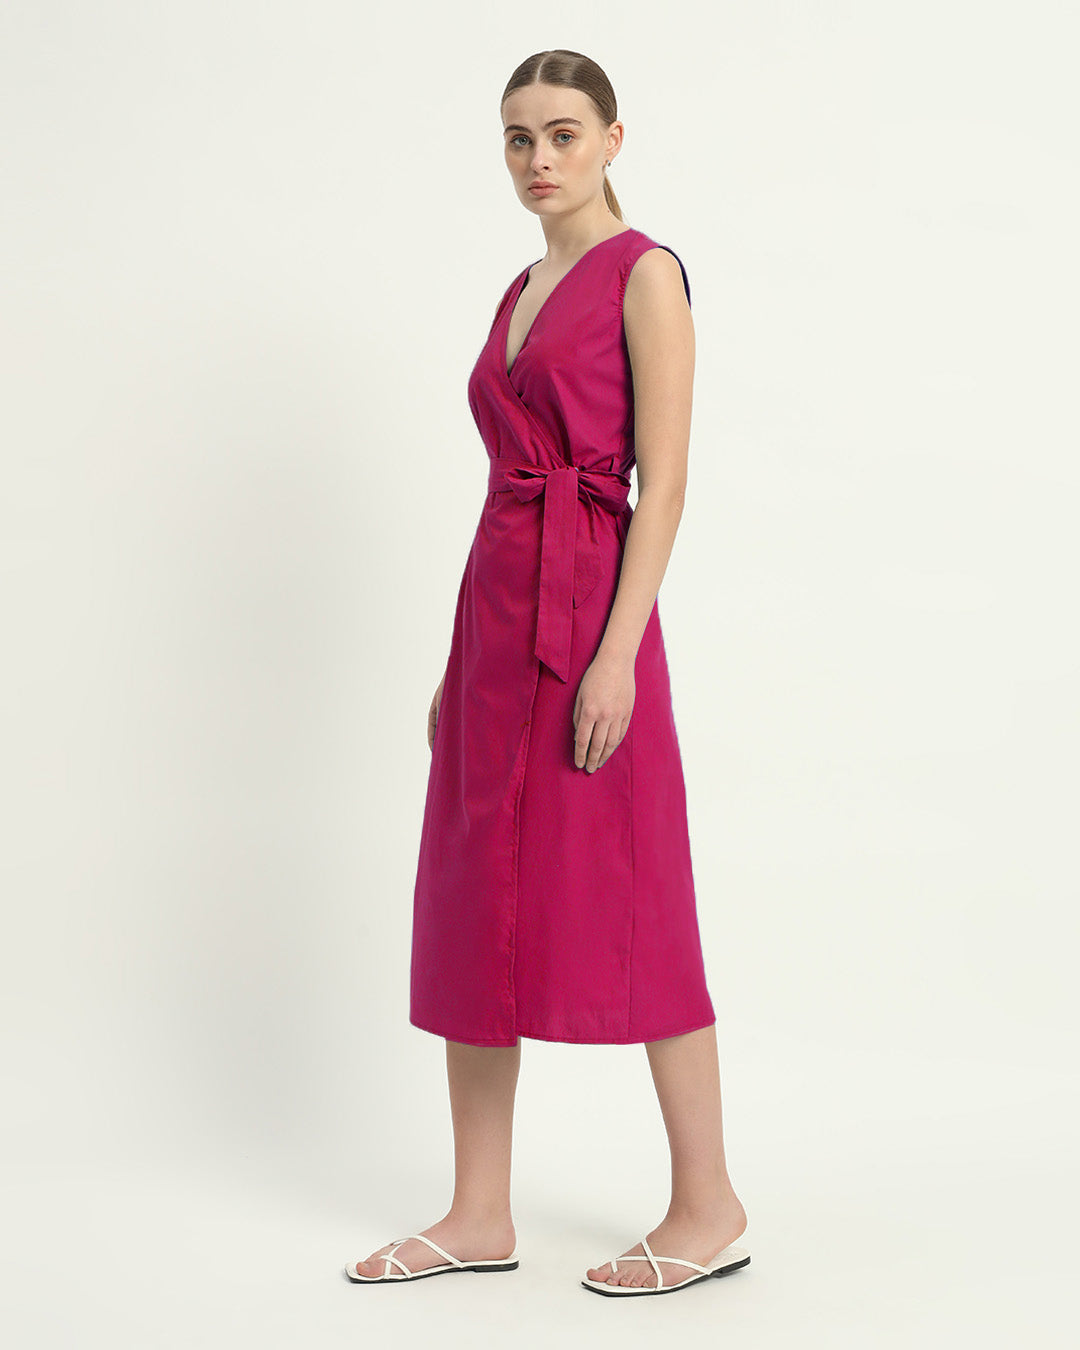 The Berry Windsor Cotton Dress